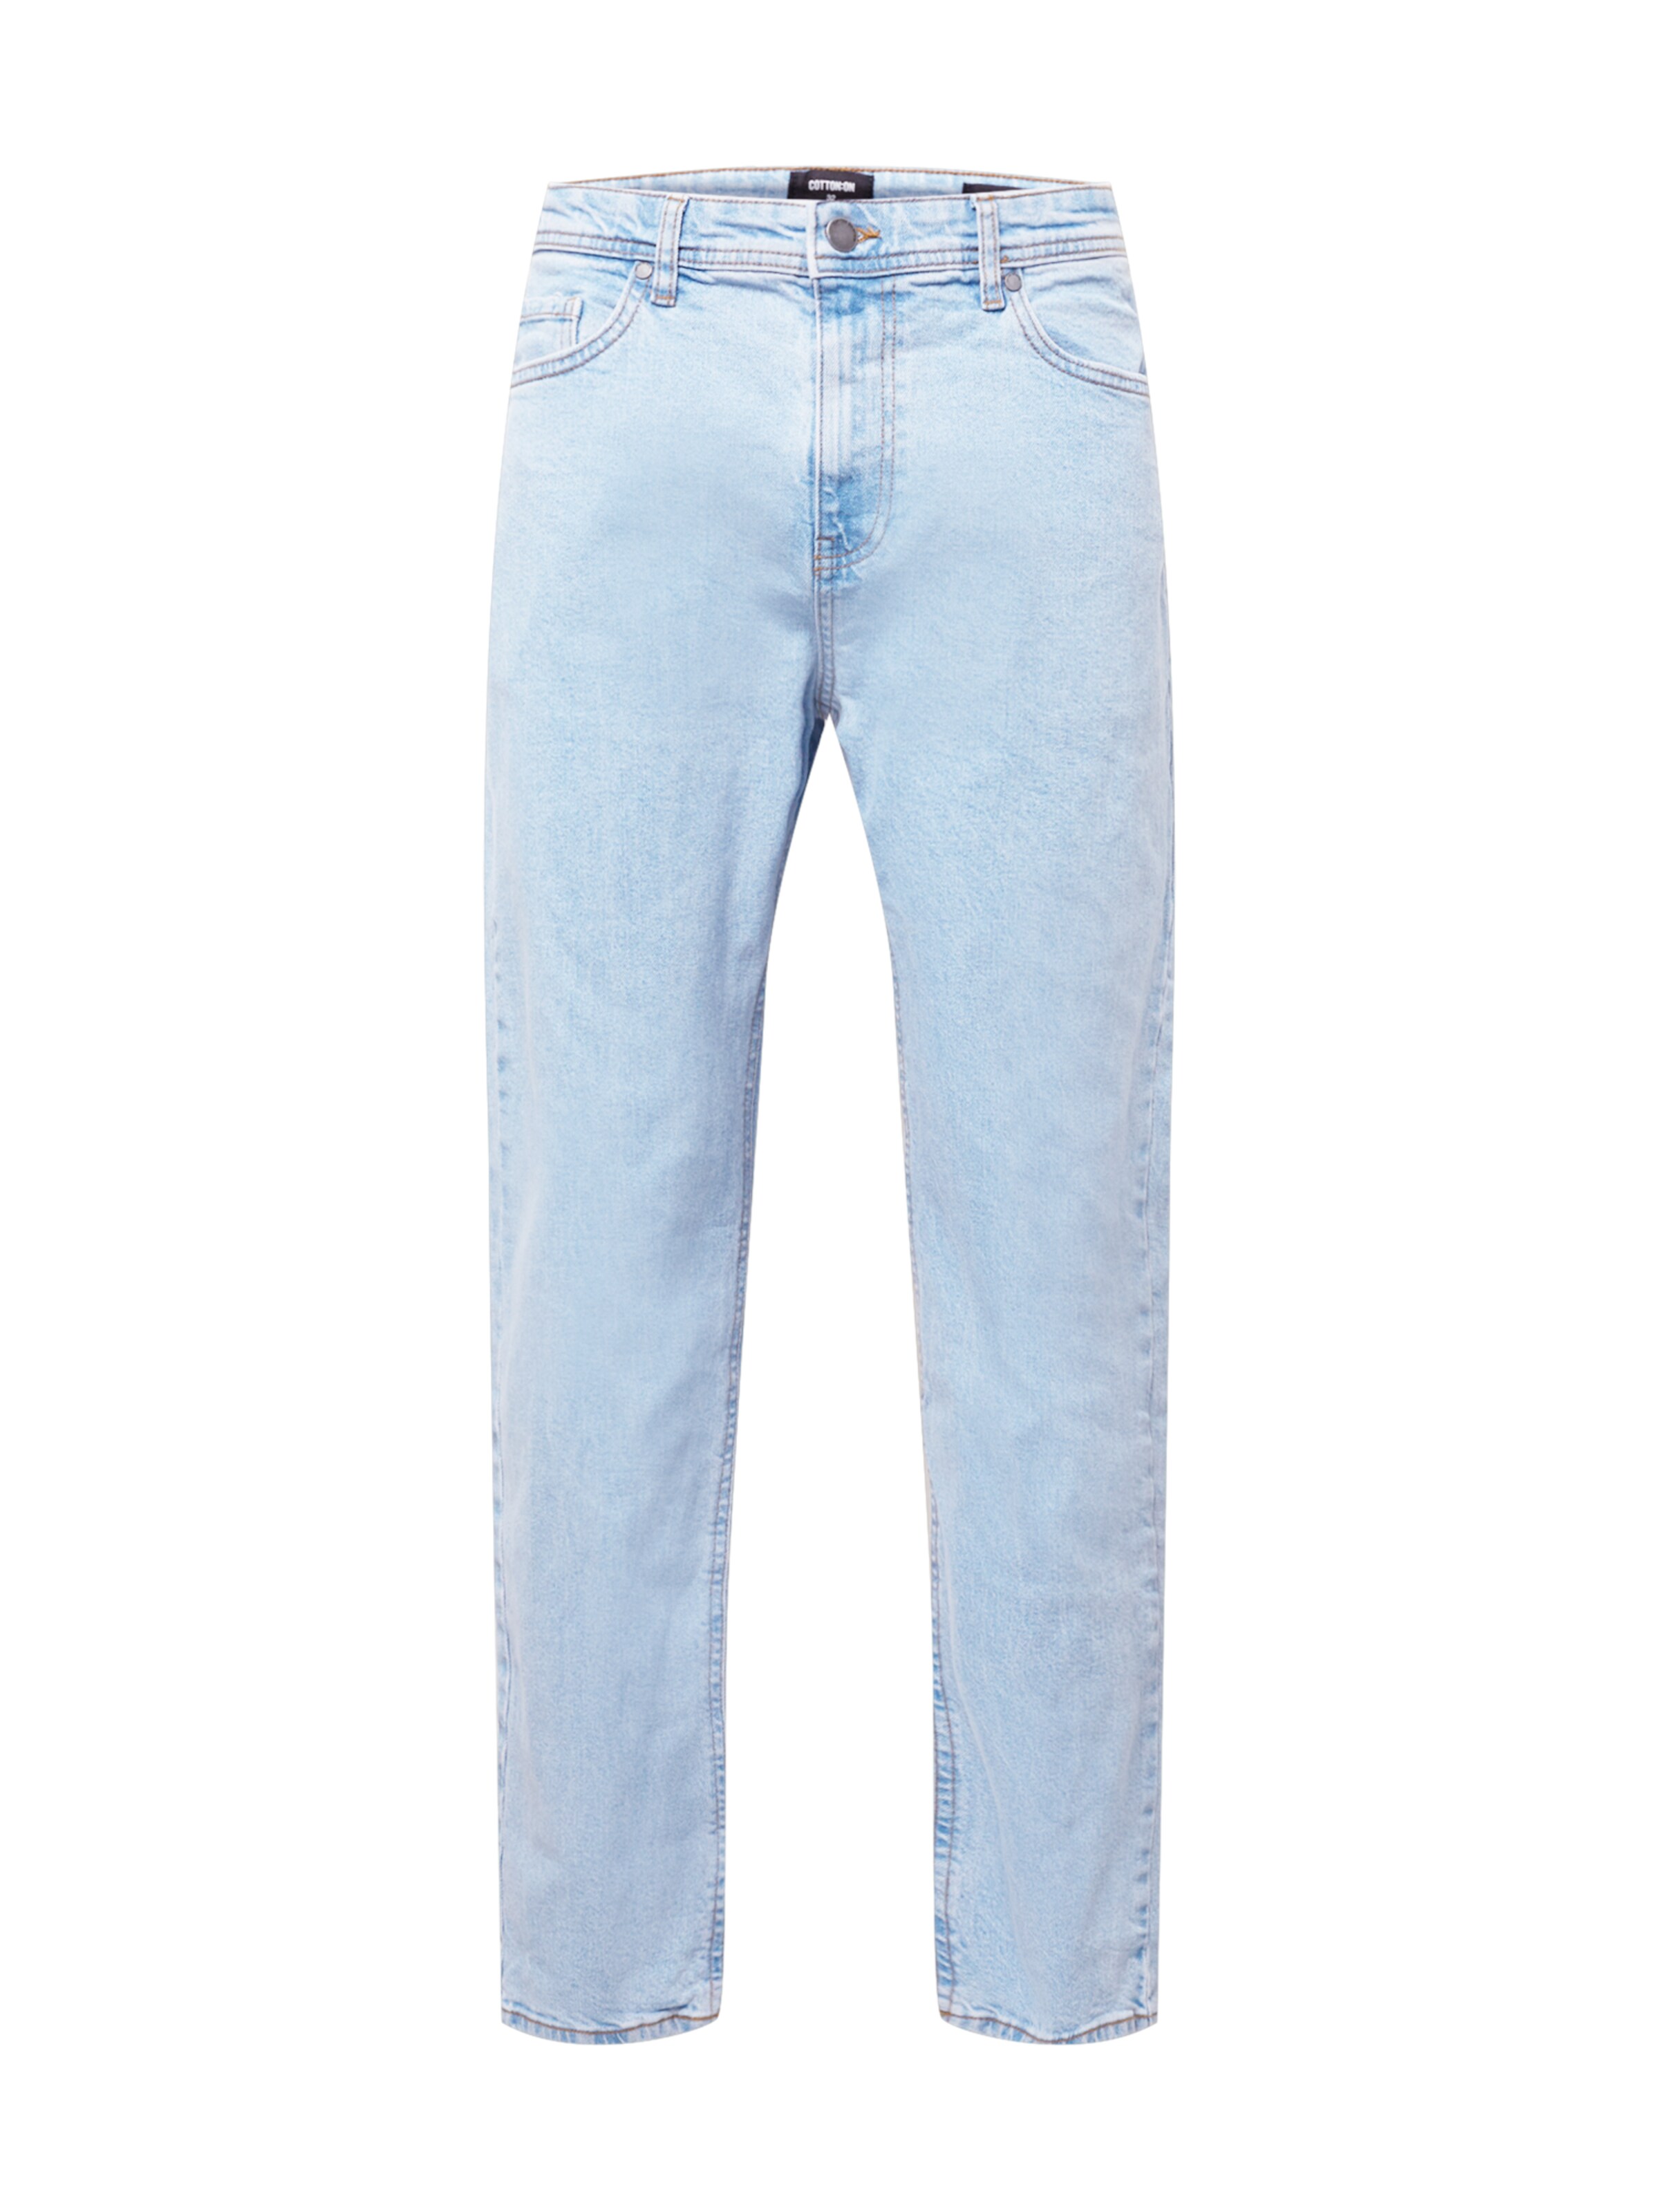 a1Y8W Uomo Cotton On Jeans BECKLEY STRAIGHT JEAN in Blu 